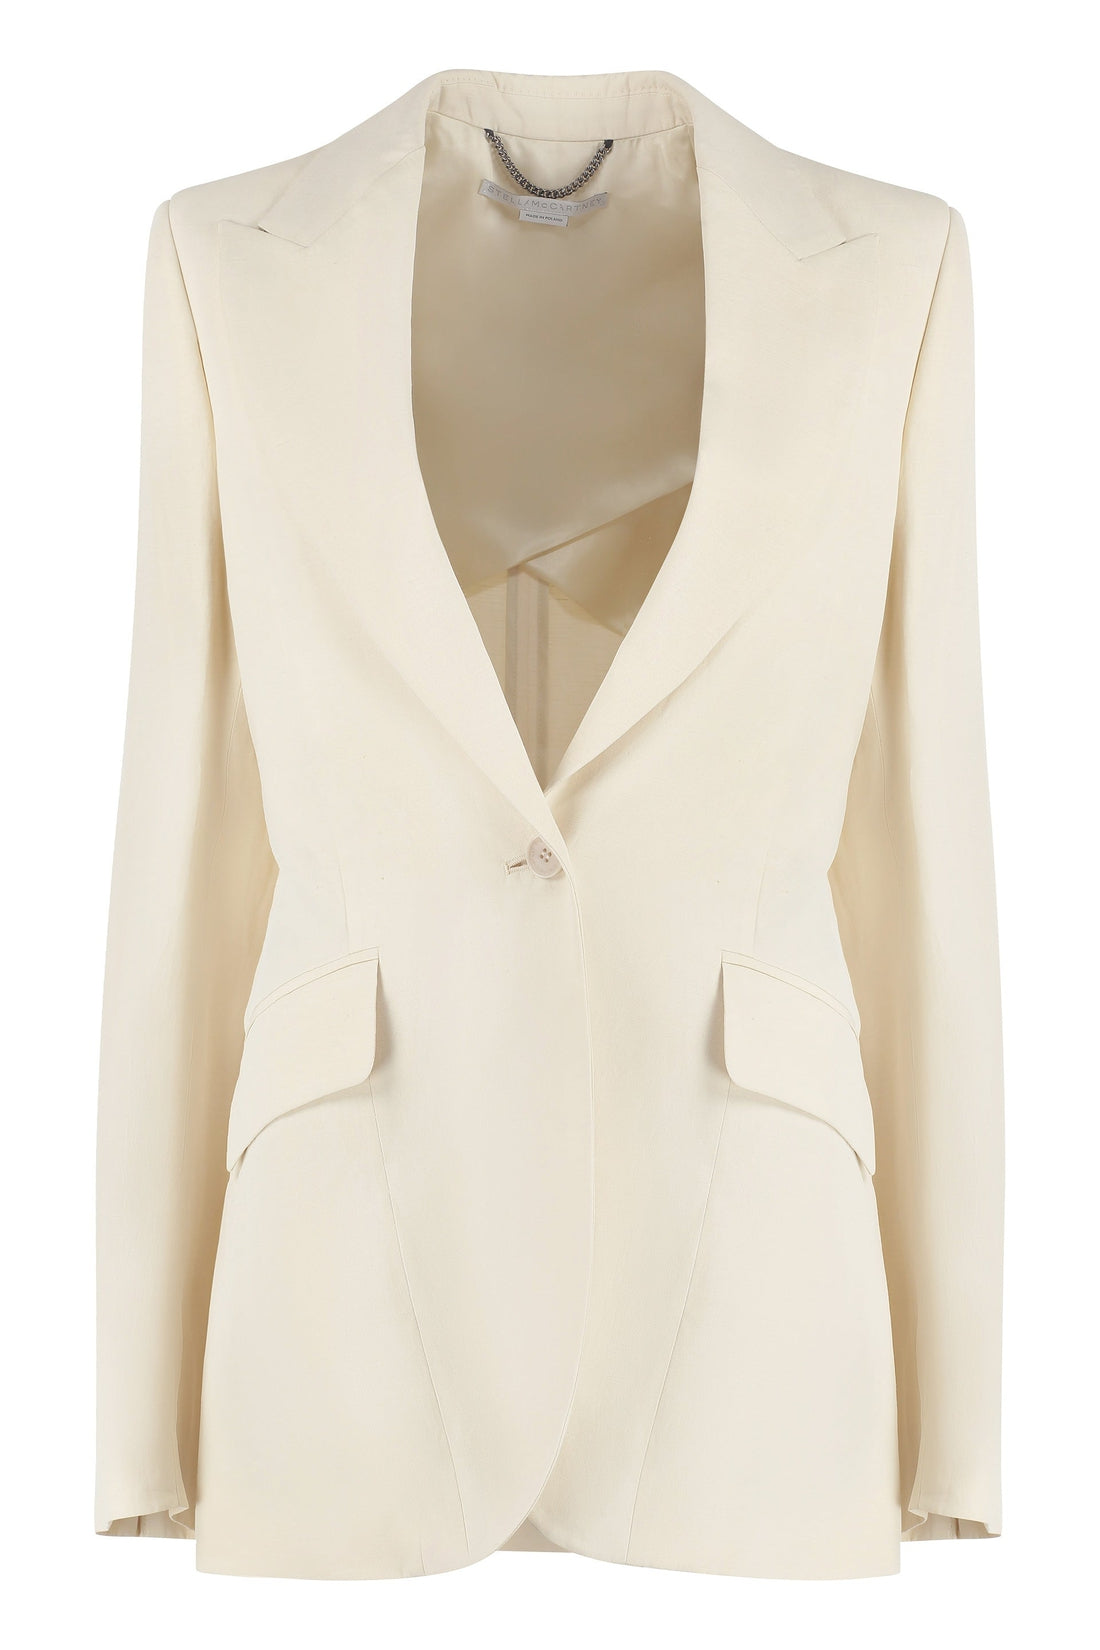 Stella McCartney-OUTLET-SALE-Single-breasted one button jacket-ARCHIVIST